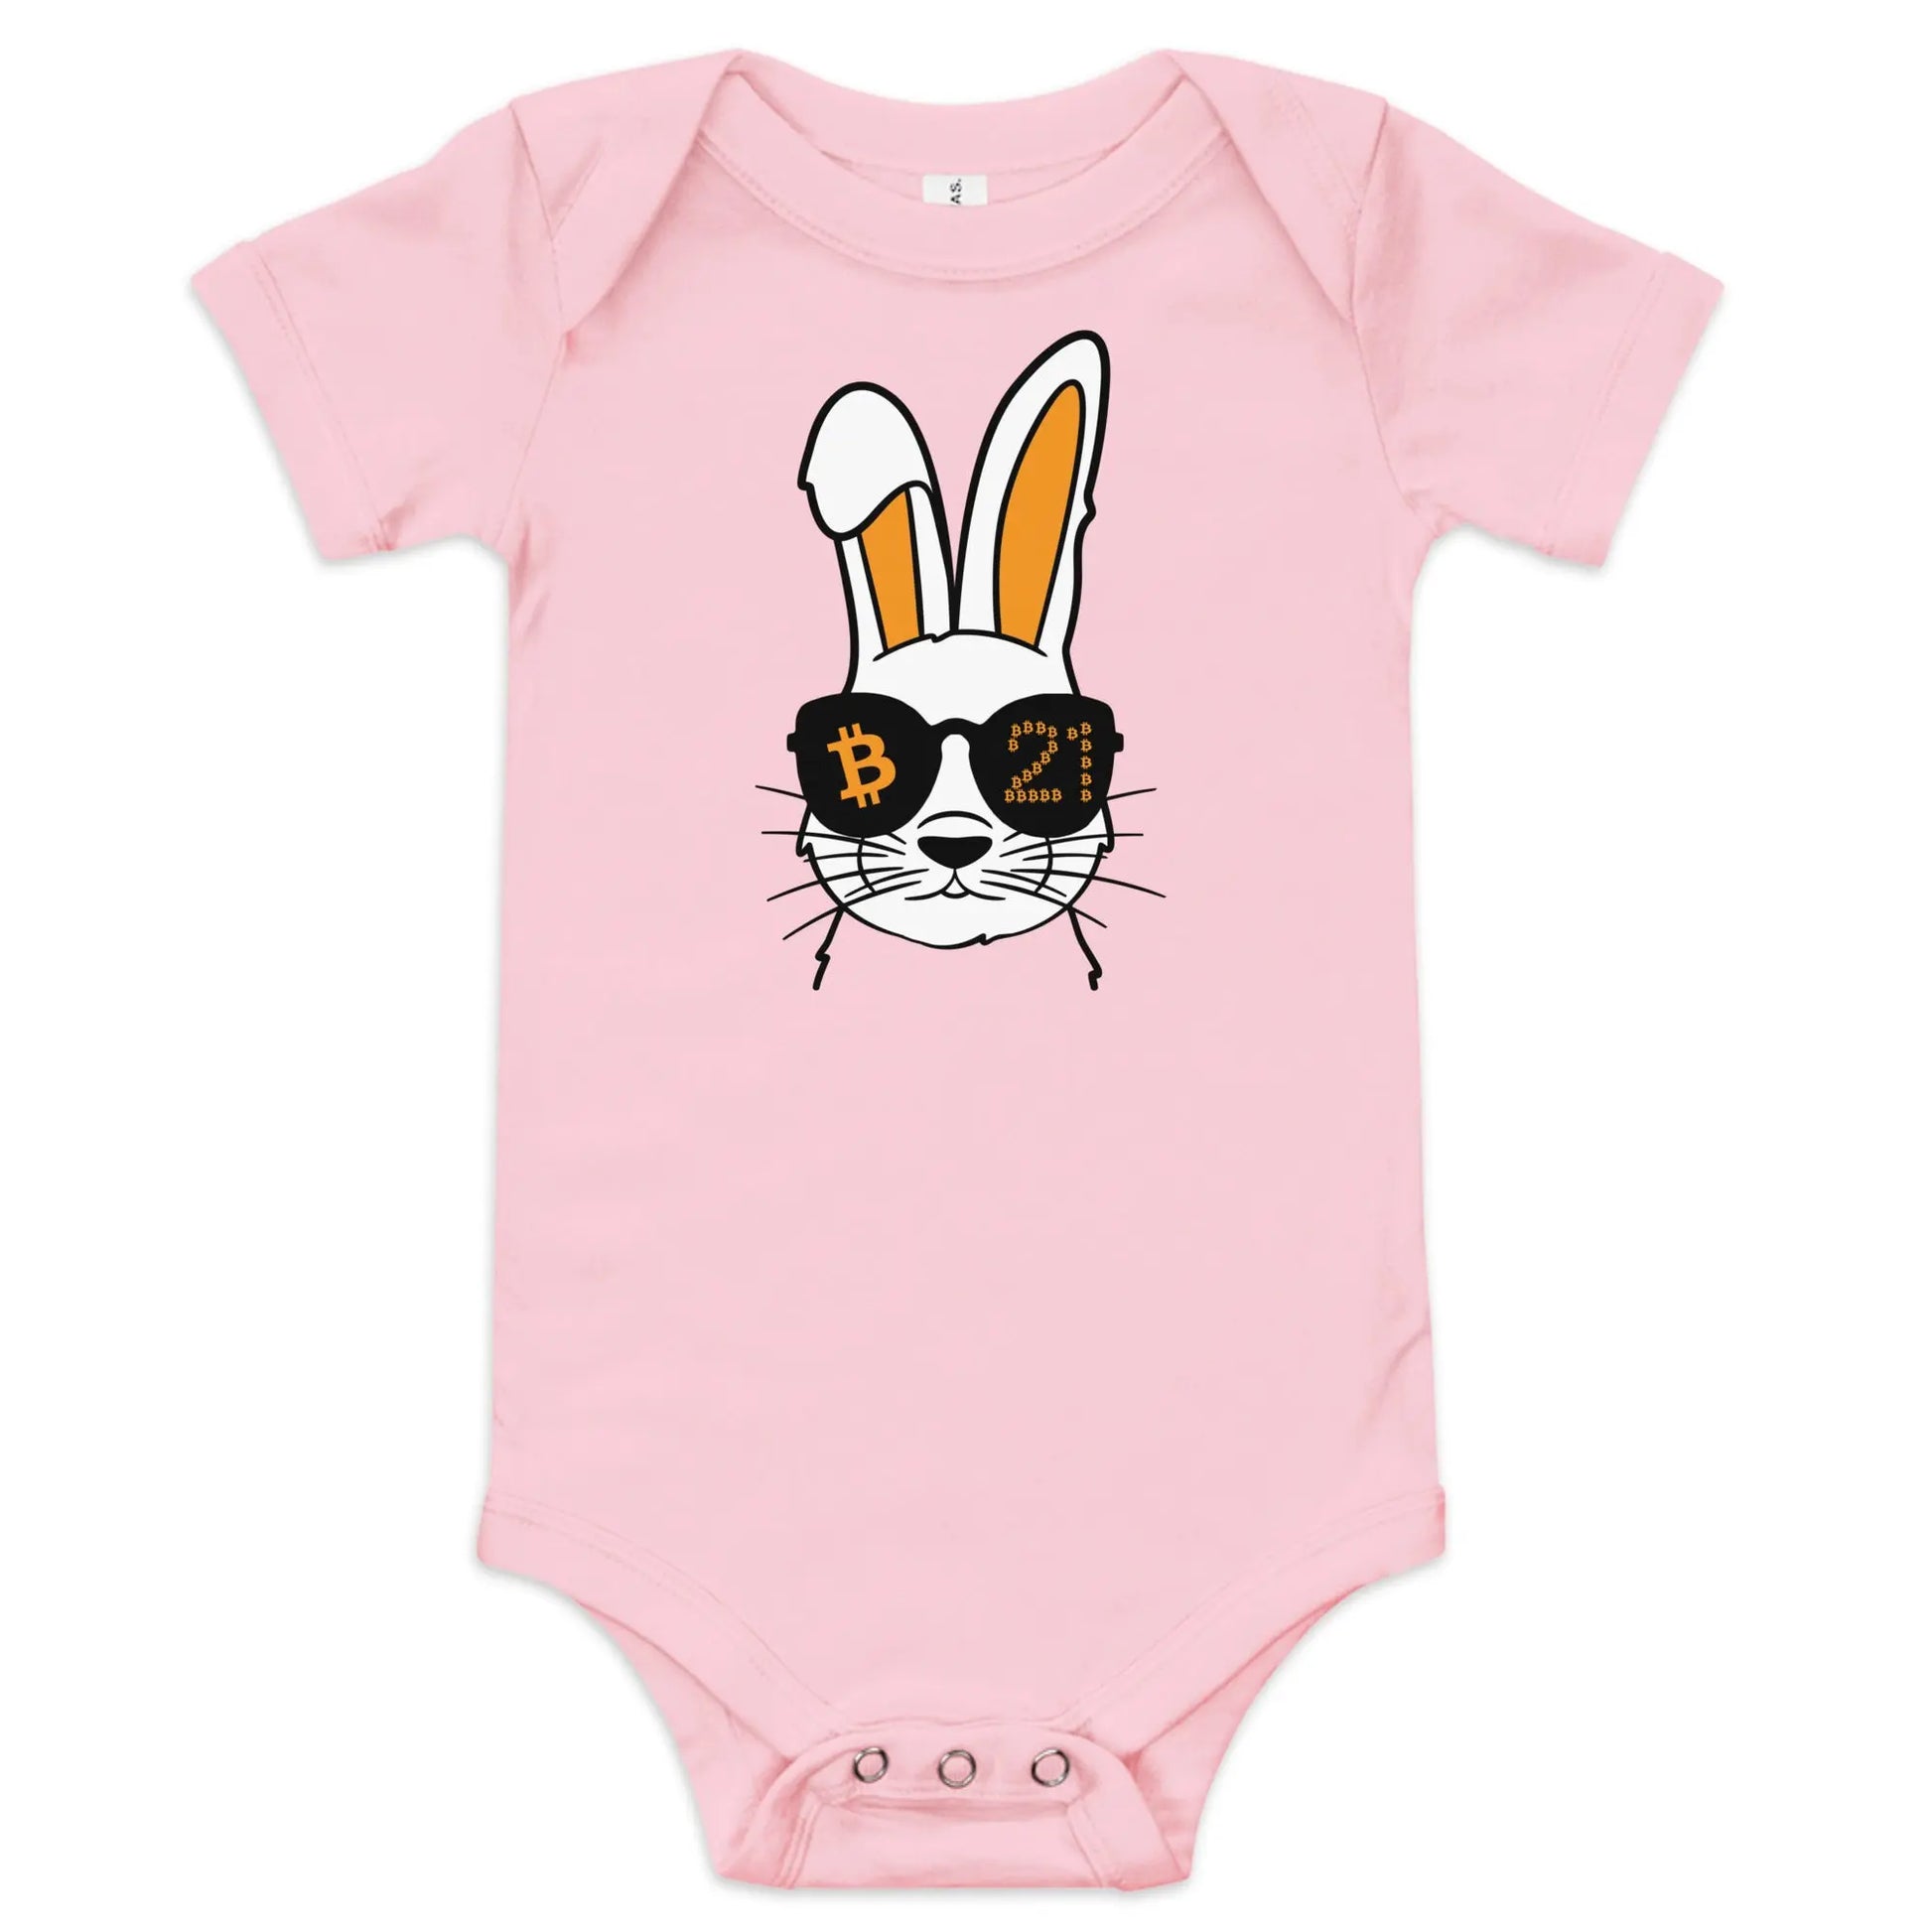 Rabbit 21 - Baby Bitcoin Body Suit Pink Color